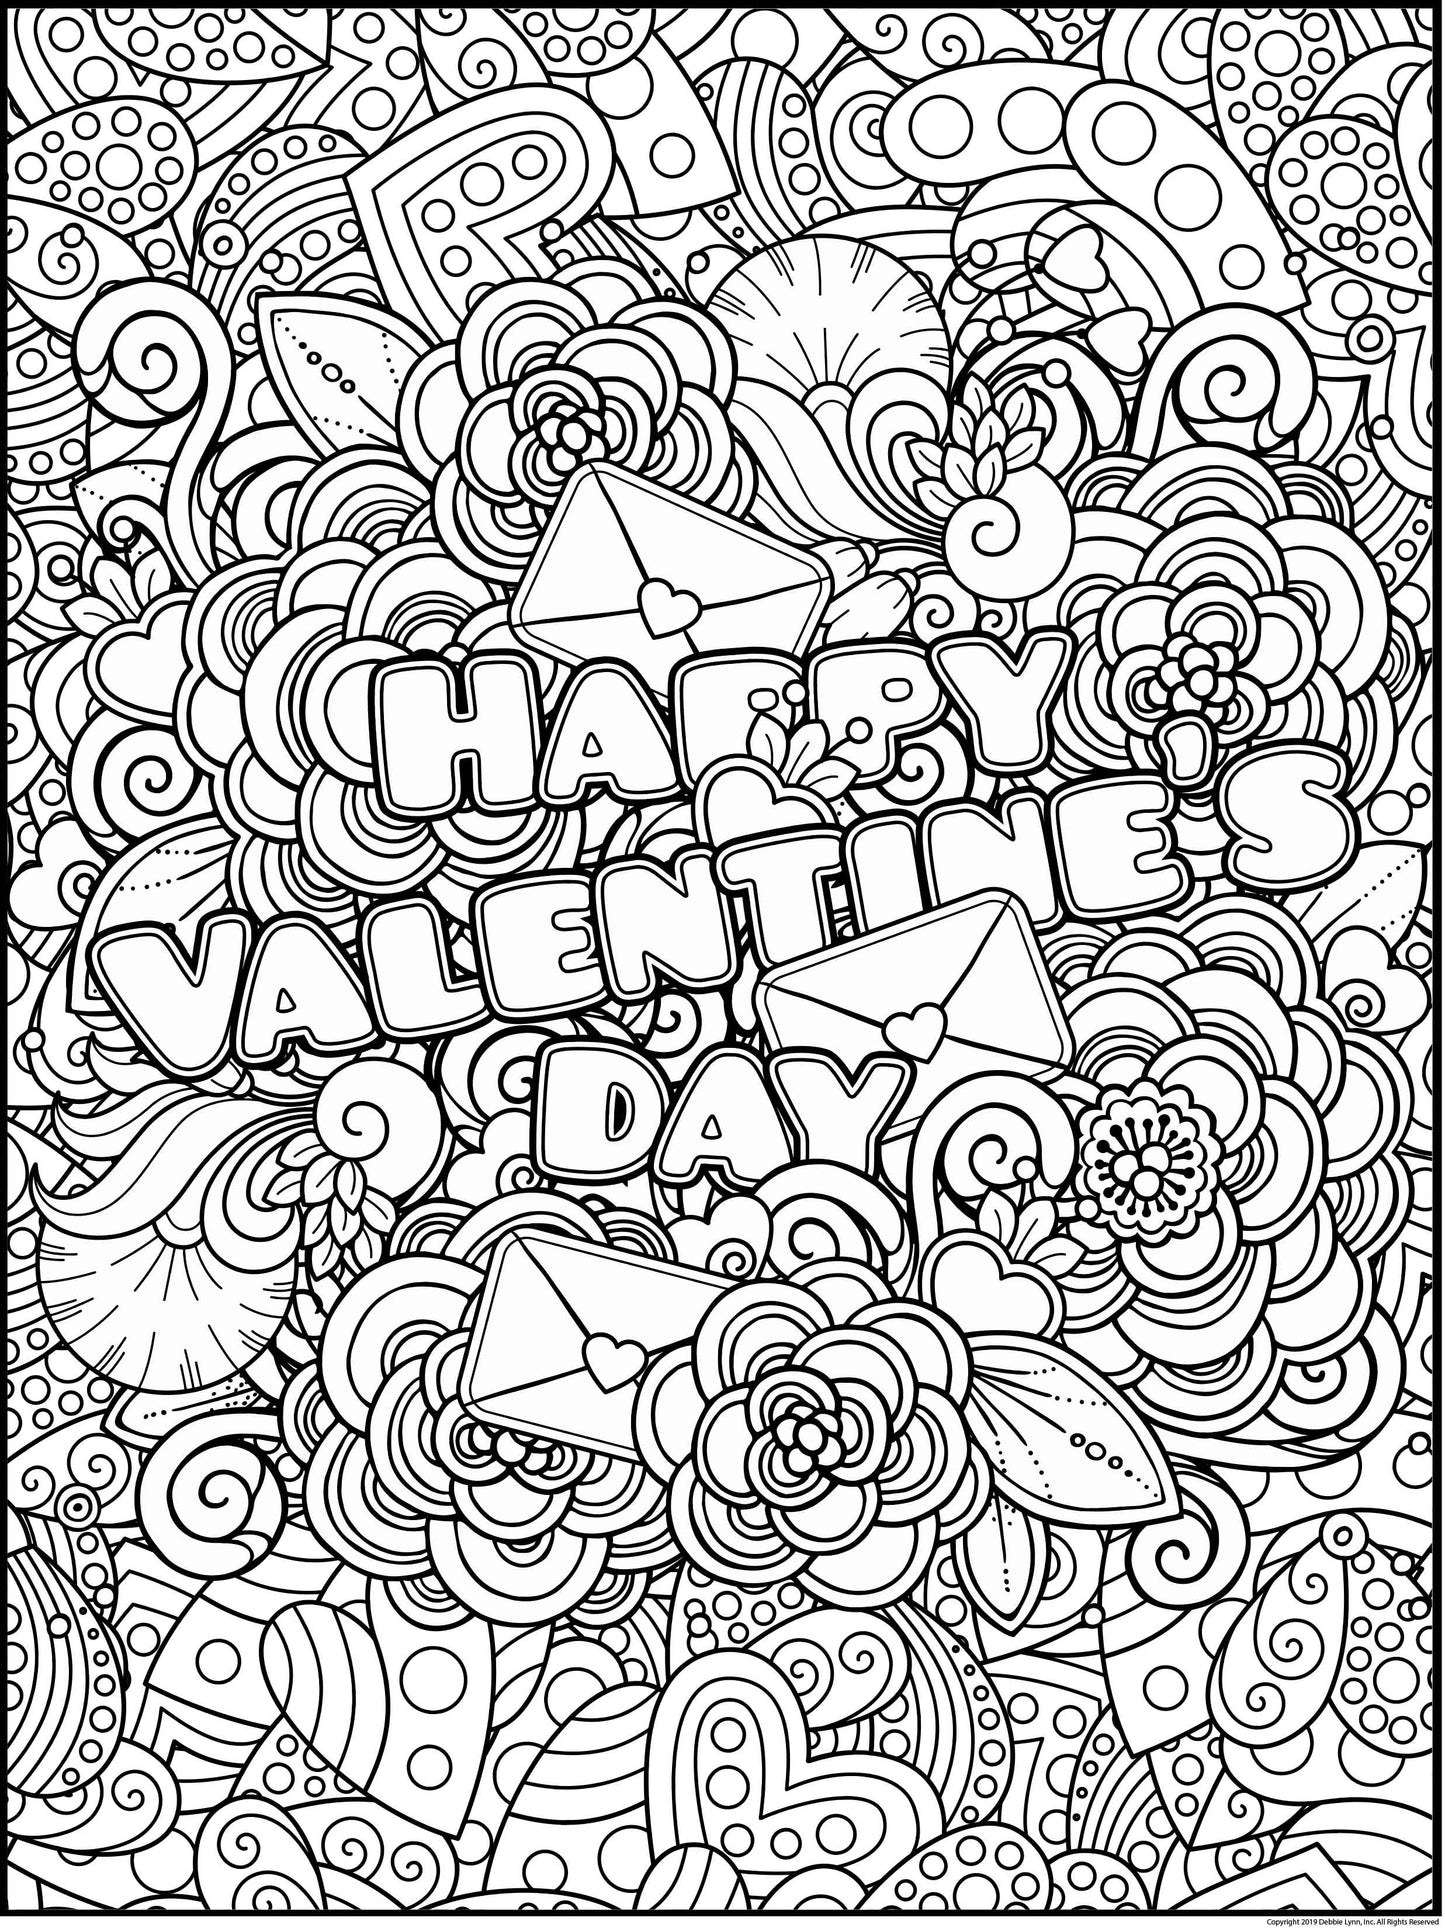 Valentines Day Personalized Giant Coloring Poster 46"x60"